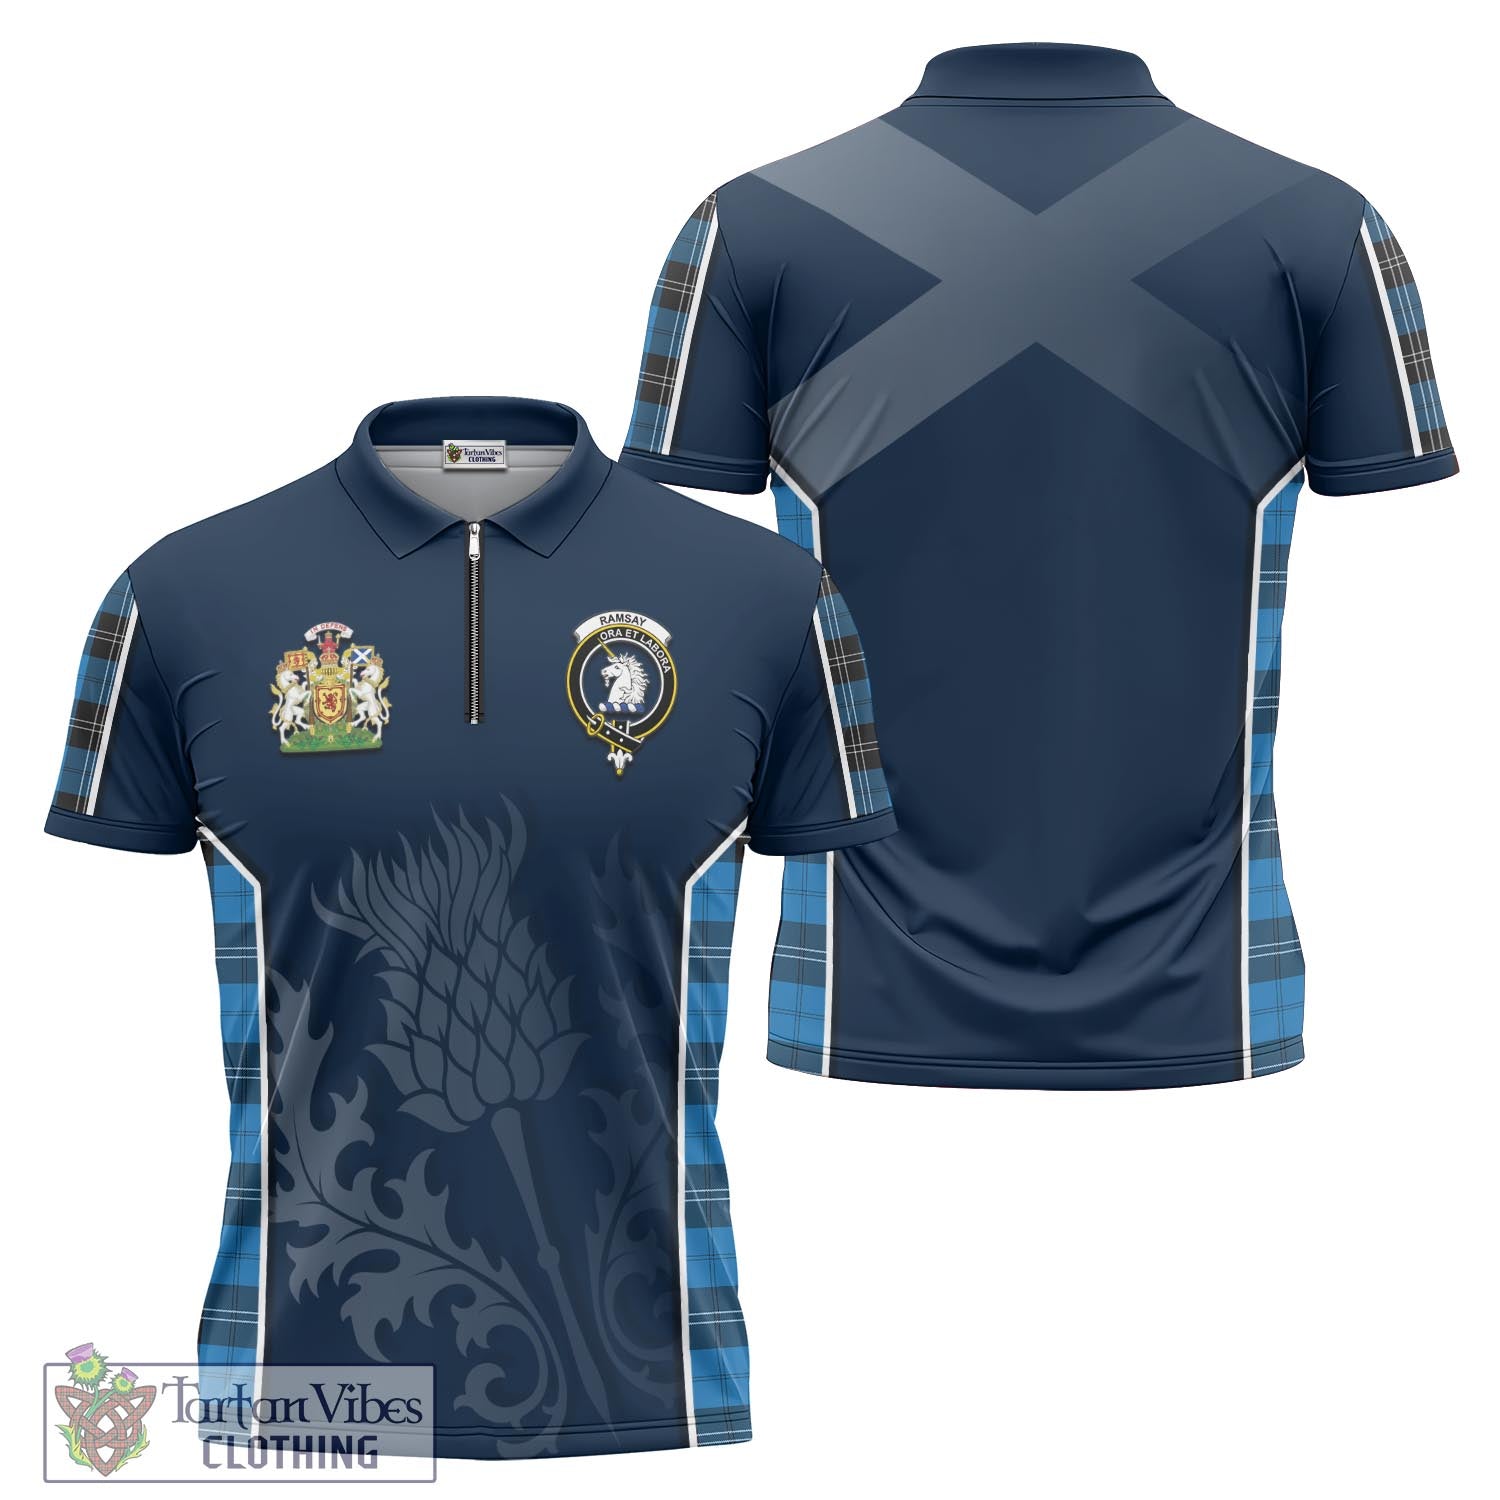 Tartan Vibes Clothing Ramsay Blue Ancient Tartan Zipper Polo Shirt with Family Crest and Scottish Thistle Vibes Sport Style